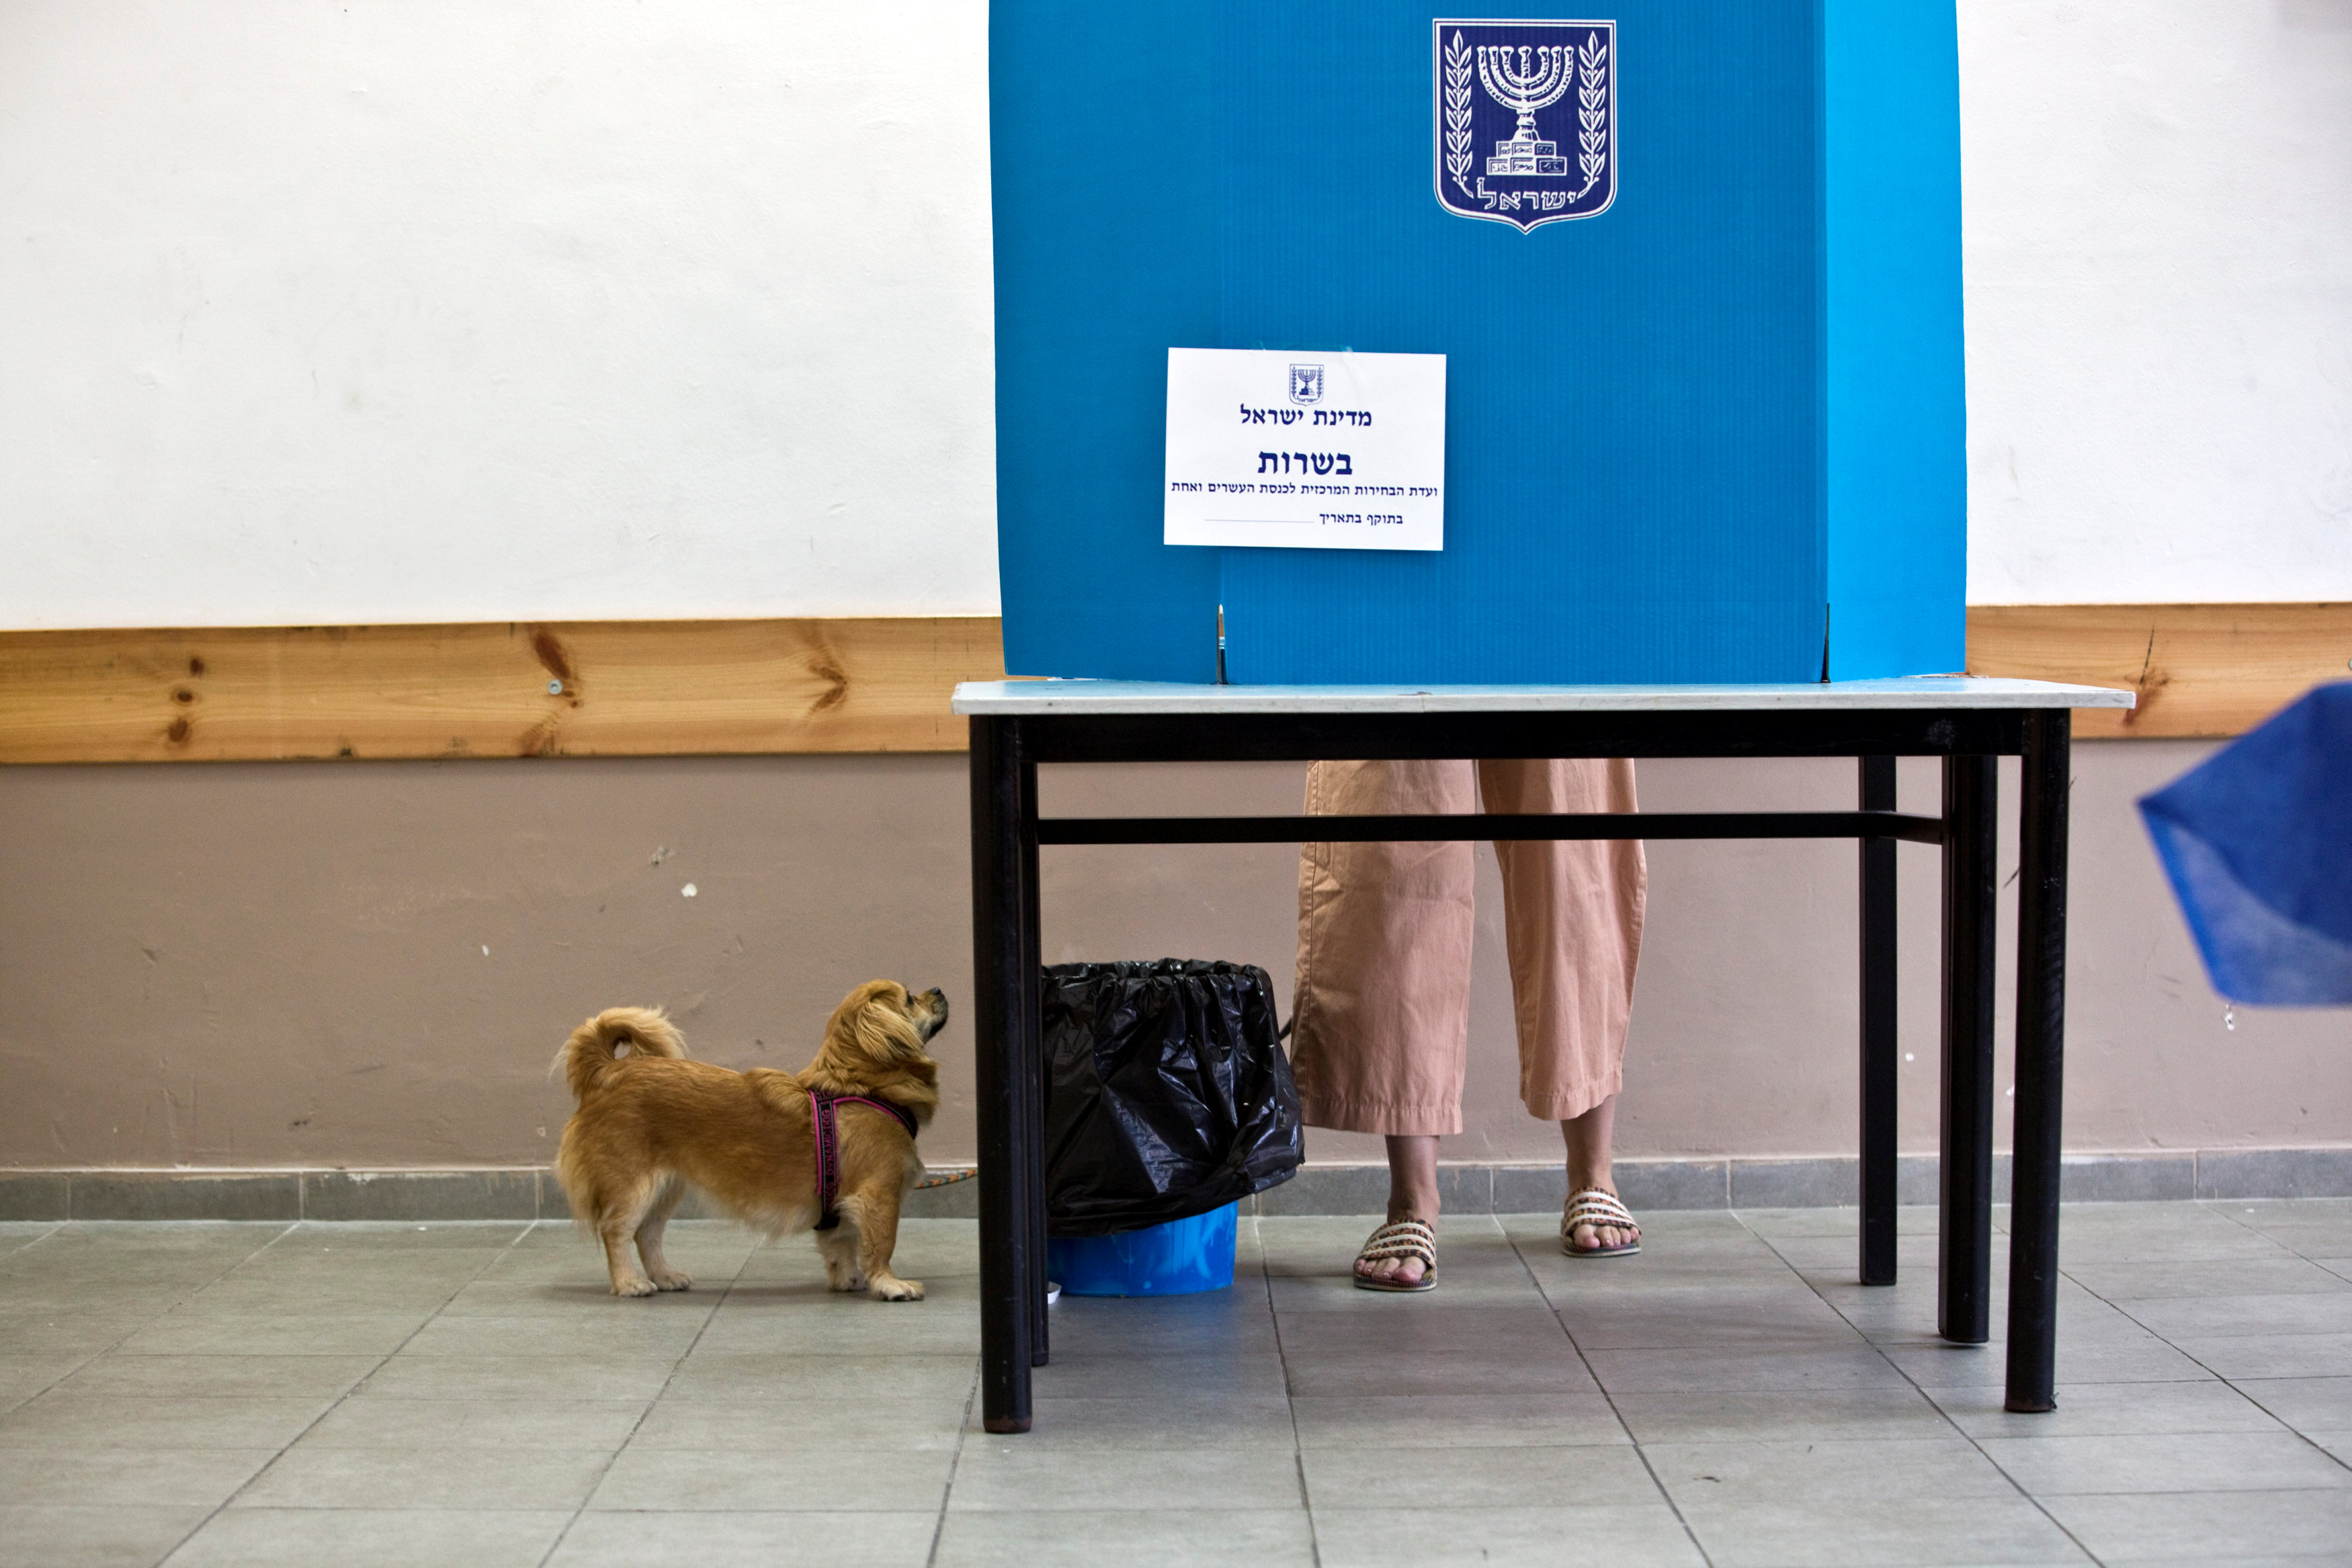 A dog stands next to it's owner as she stands behind a voting booth as Israelis vote in a parliamentary election, at a polling station in Tel Aviv (Reuters)